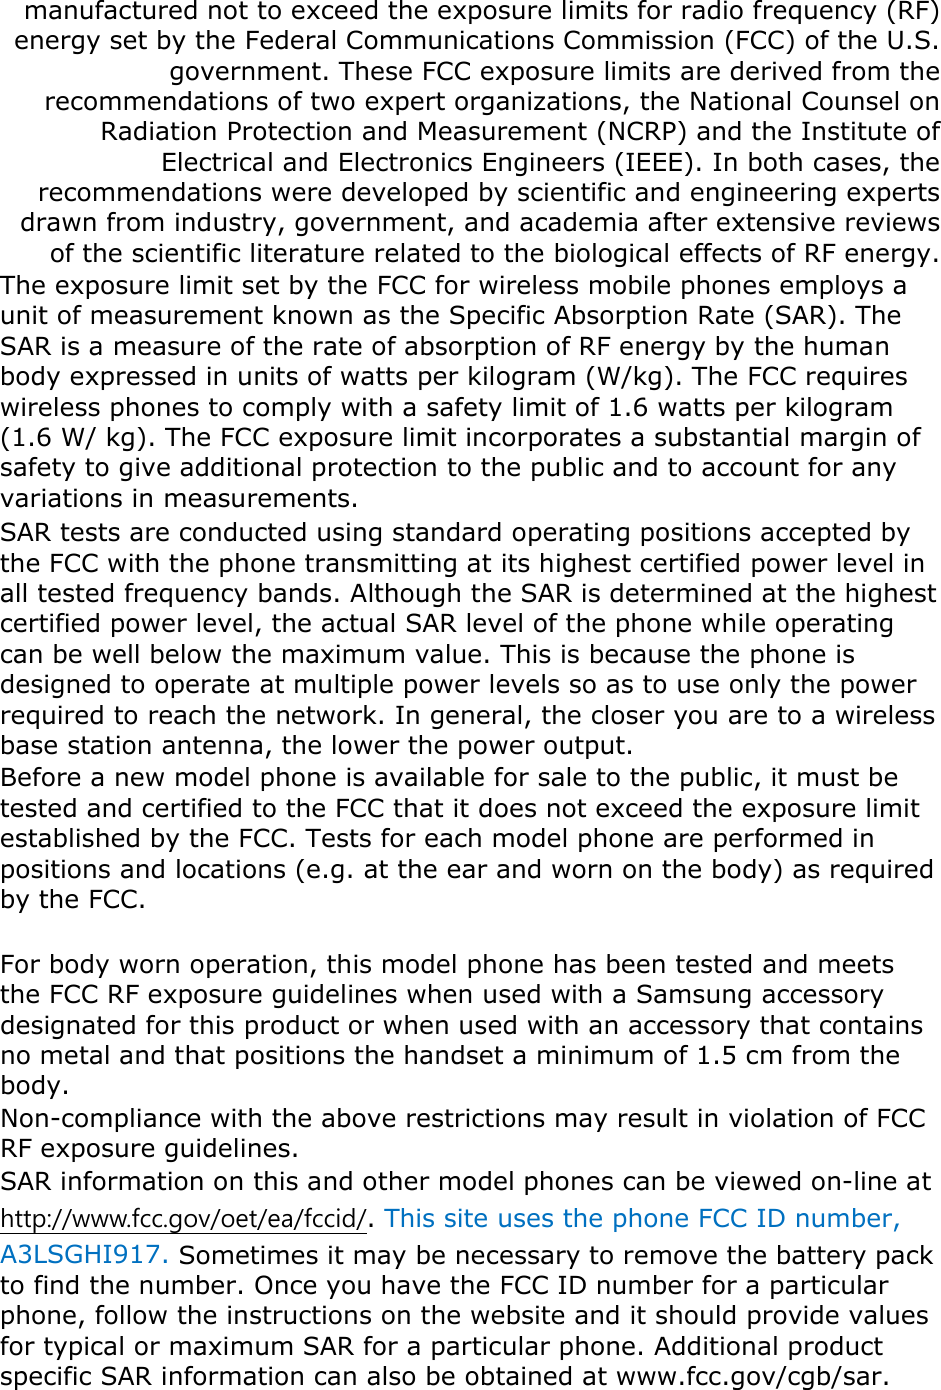 manufactured not to exceed the exposure limits for radio frequency (RF) energy set by the Federal Communications Commission (FCC) of the U.S. government. These FCC exposure limits are derived from the recommendations of two expert organizations, the National Counsel on Radiation Protection and Measurement (NCRP) and the Institute of Electrical and Electronics Engineers (IEEE). In both cases, the recommendations were developed by scientific and engineering experts drawn from industry, government, and academia after extensive reviews of the scientific literature related to the biological effects of RF energy. The exposure limit set by the FCC for wireless mobile phones employs a unit of measurement known as the Specific Absorption Rate (SAR). The SAR is a measure of the rate of absorption of RF energy by the human body expressed in units of watts per kilogram (W/kg). The FCC requires wireless phones to comply with a safety limit of 1.6 watts per kilogram (1.6 W/ kg). The FCC exposure limit incorporates a substantial margin of safety to give additional protection to the public and to account for any variations in measurements. SAR tests are conducted using standard operating positions accepted by the FCC with the phone transmitting at its highest certified power level in all tested frequency bands. Although the SAR is determined at the highest certified power level, the actual SAR level of the phone while operating can be well below the maximum value. This is because the phone is designed to operate at multiple power levels so as to use only the power required to reach the network. In general, the closer you are to a wireless base station antenna, the lower the power output. Before a new model phone is available for sale to the public, it must be tested and certified to the FCC that it does not exceed the exposure limit established by the FCC. Tests for each model phone are performed in positions and locations (e.g. at the ear and worn on the body) as required by the FCC.      For body worn operation, this model phone has been tested and meets the FCC RF exposure guidelines when used with a Samsung accessory designated for this product or when used with an accessory that contains no metal and that positions the handset a minimum of 1.5 cm from the body.   Non-compliance with the above restrictions may result in violation of FCC RF exposure guidelines. SAR information on this and other model phones can be viewed on-line at http://www.fcc.gov/oet/ea/fccid/. This site uses the phone FCC ID number, A3LSGHI917. Sometimes it may be necessary to remove the battery pack to find the number. Once you have the FCC ID number for a particular phone, follow the instructions on the website and it should provide values for typical or maximum SAR for a particular phone. Additional product specific SAR information can also be obtained at www.fcc.gov/cgb/sar. 